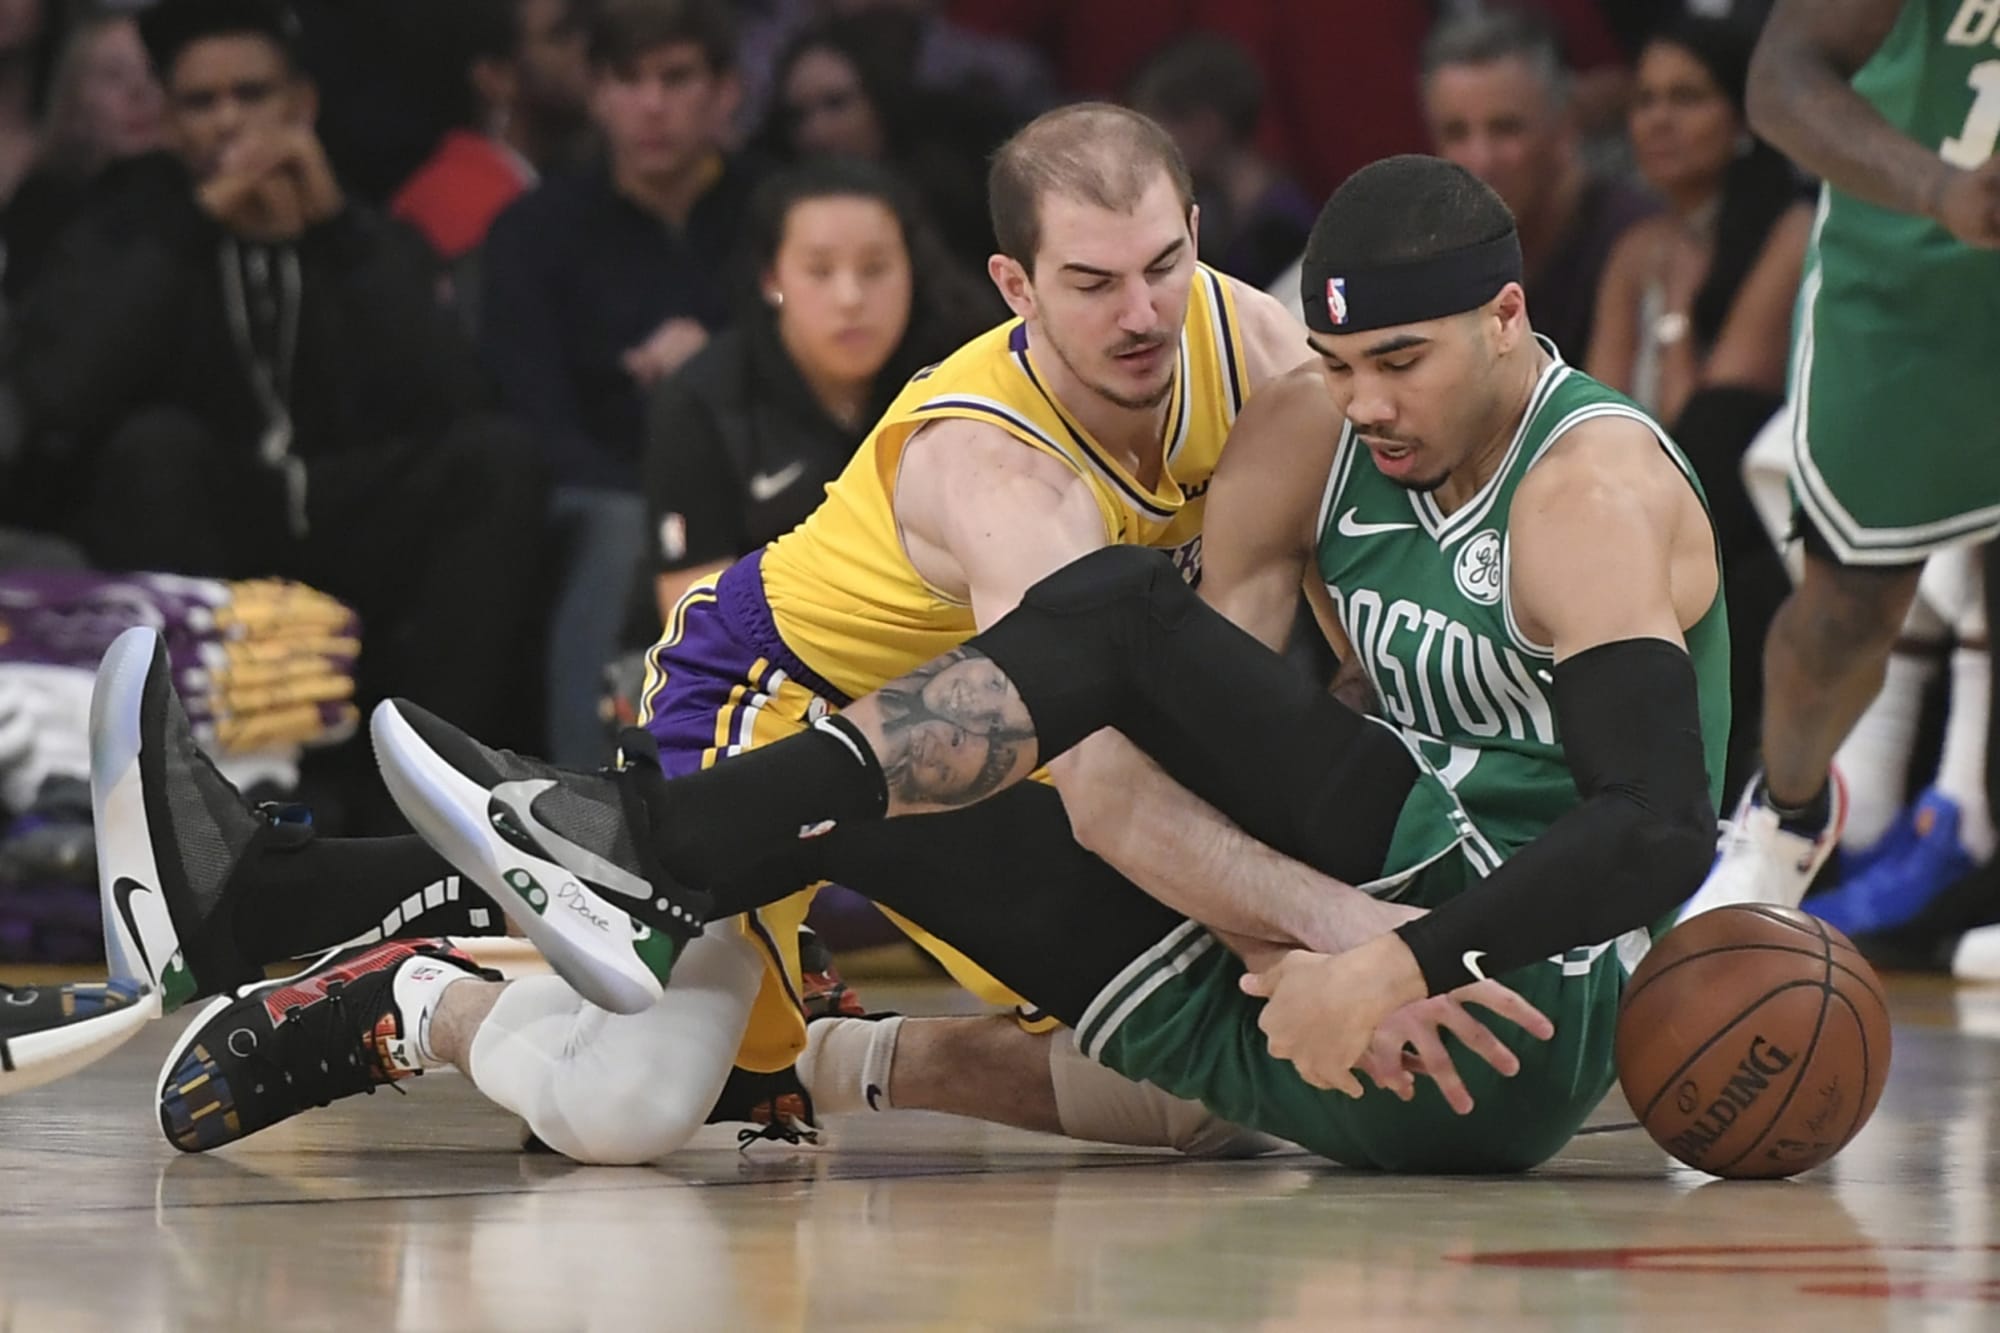 Lakers vs. Celtics: Start time, TV schedule and game preview